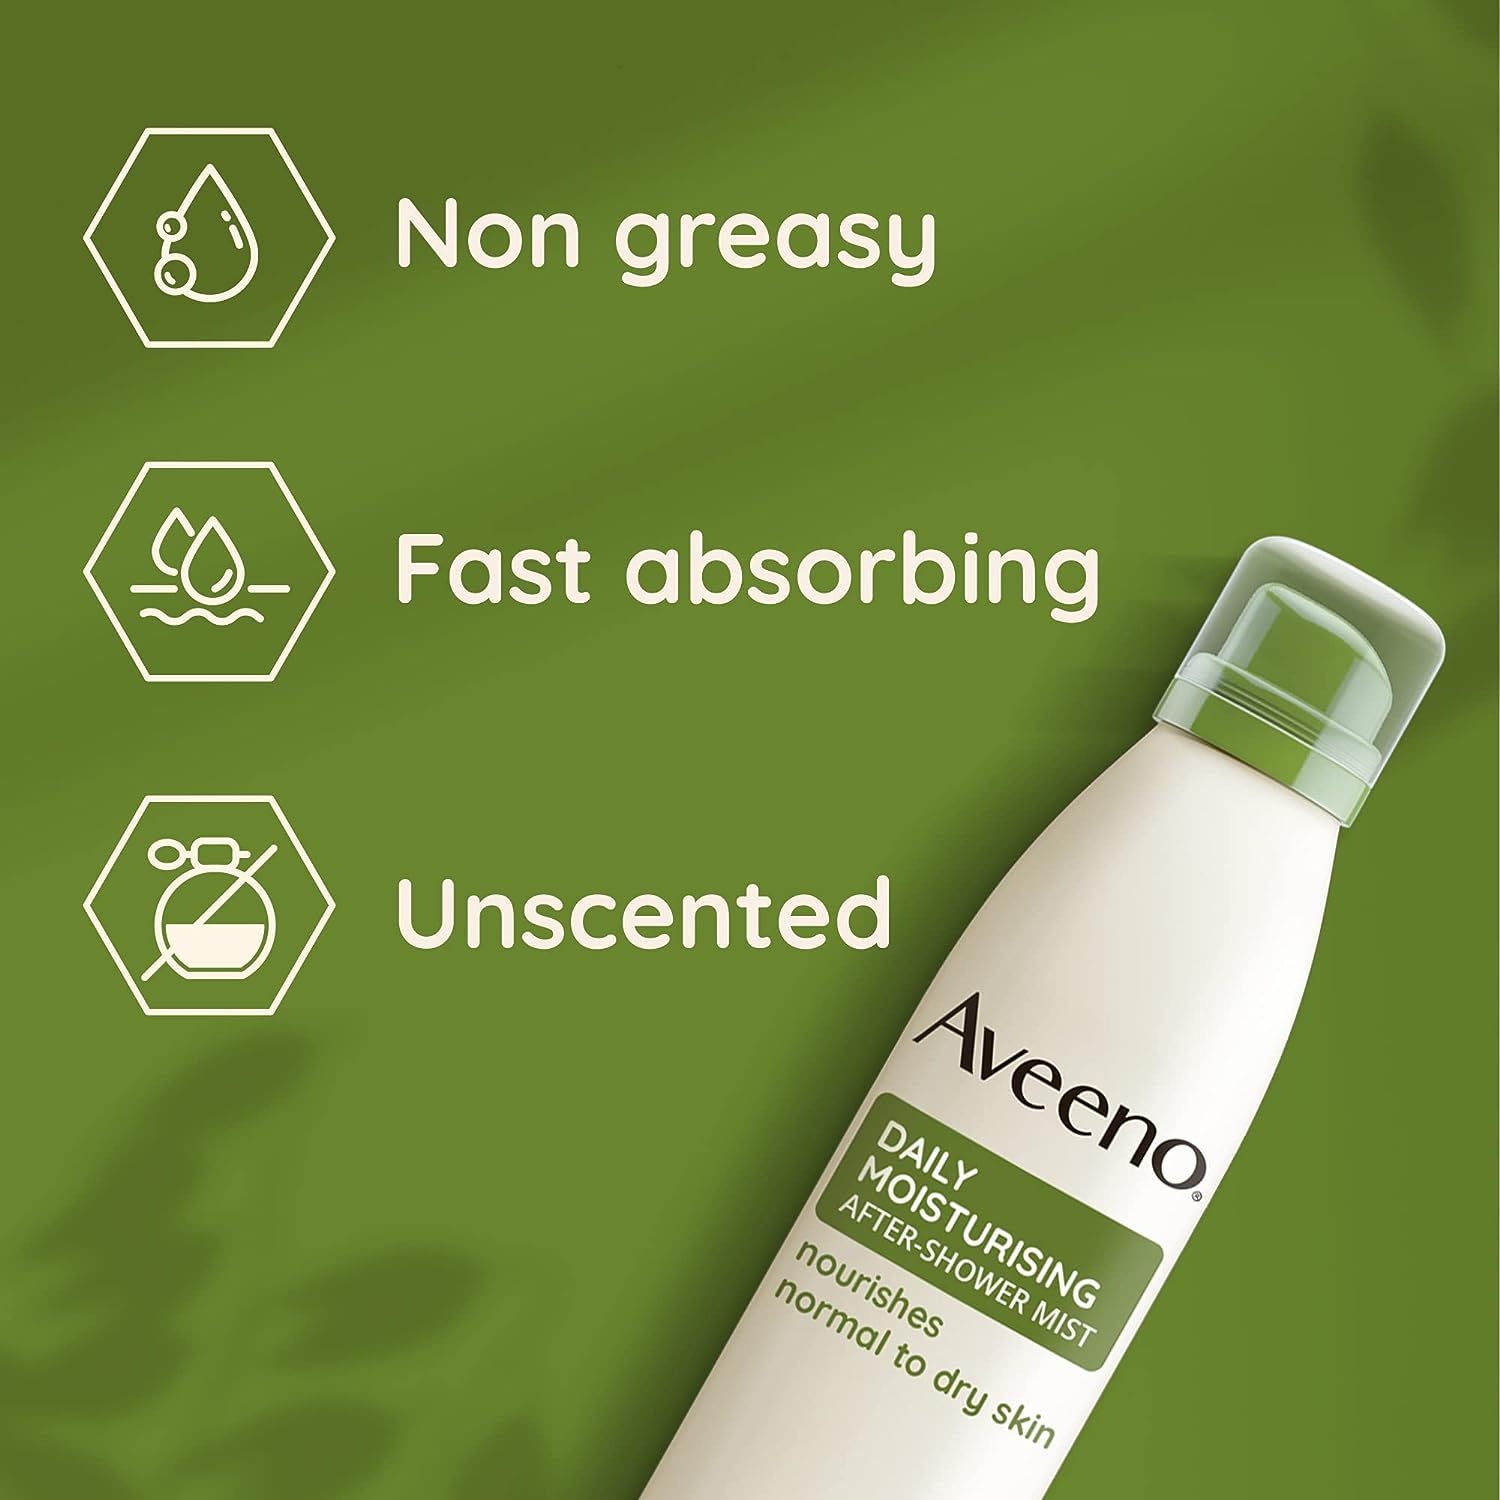 Aveeno Daily Moisturising After-Shower Mist, Formulated with Oats, Suitable For Sensitive Skin,200ml - Healthxpress.ie